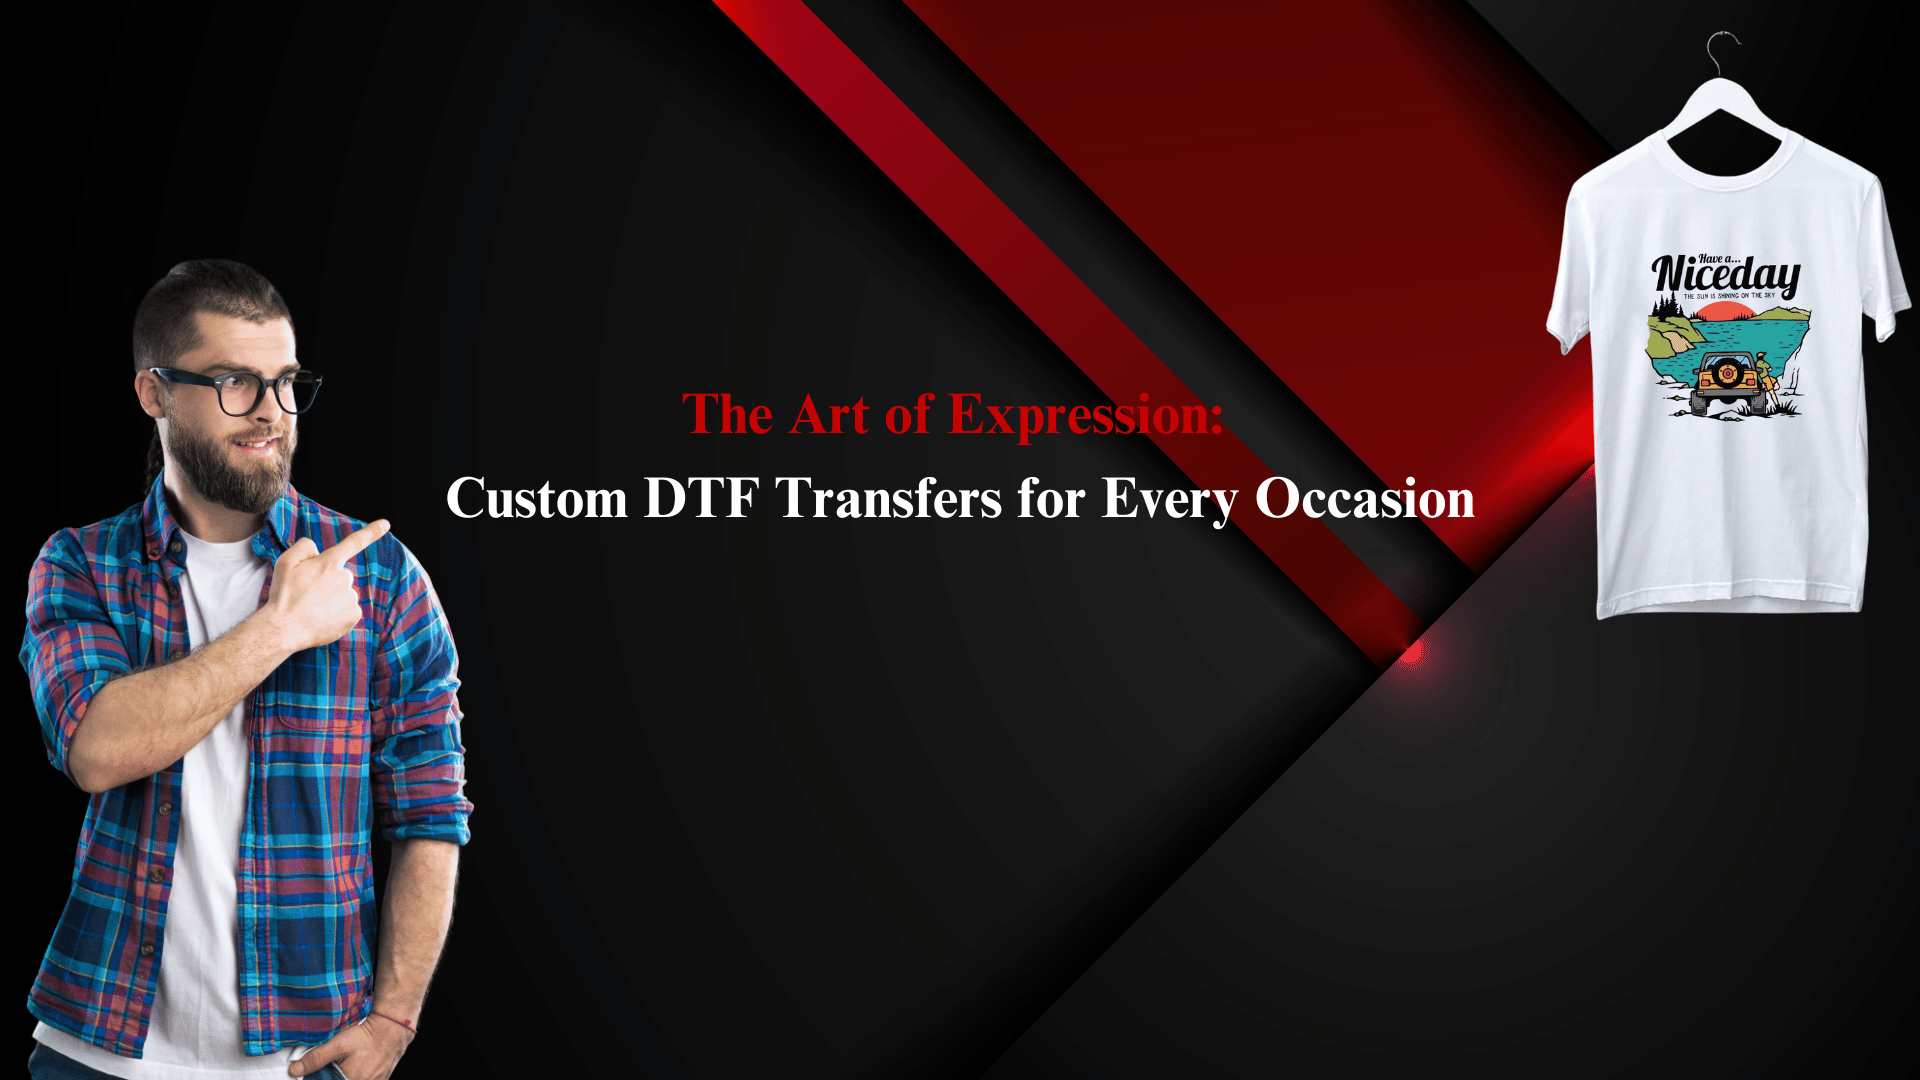 The Art of Expression: Custom DTF Transfers for Every Occasion